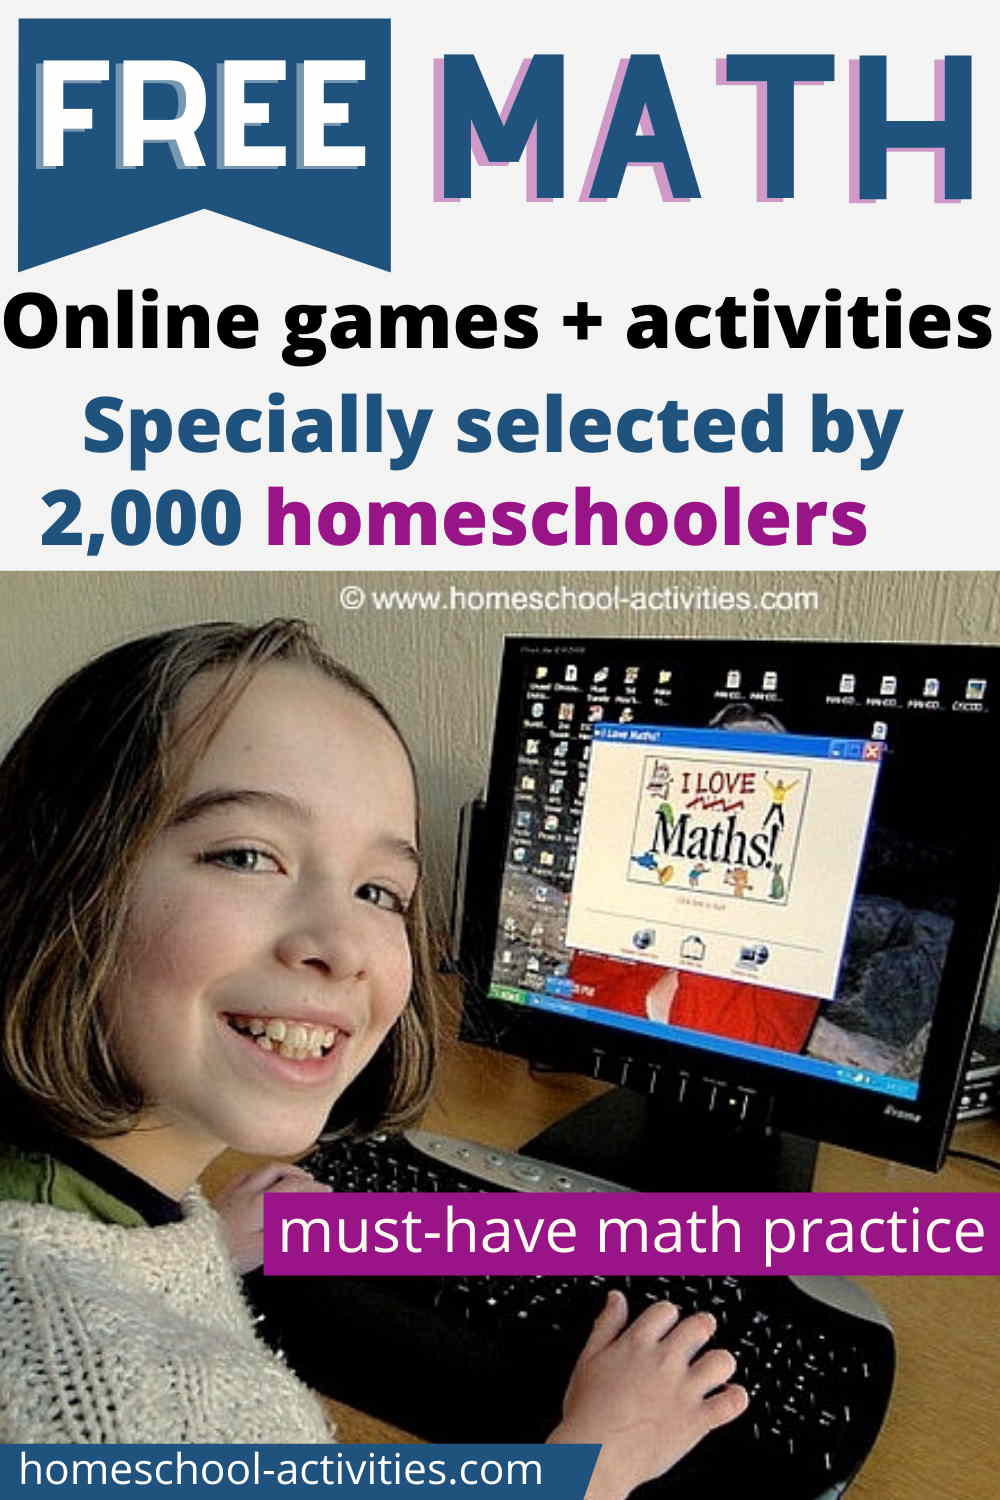 Free math games and activities for kids